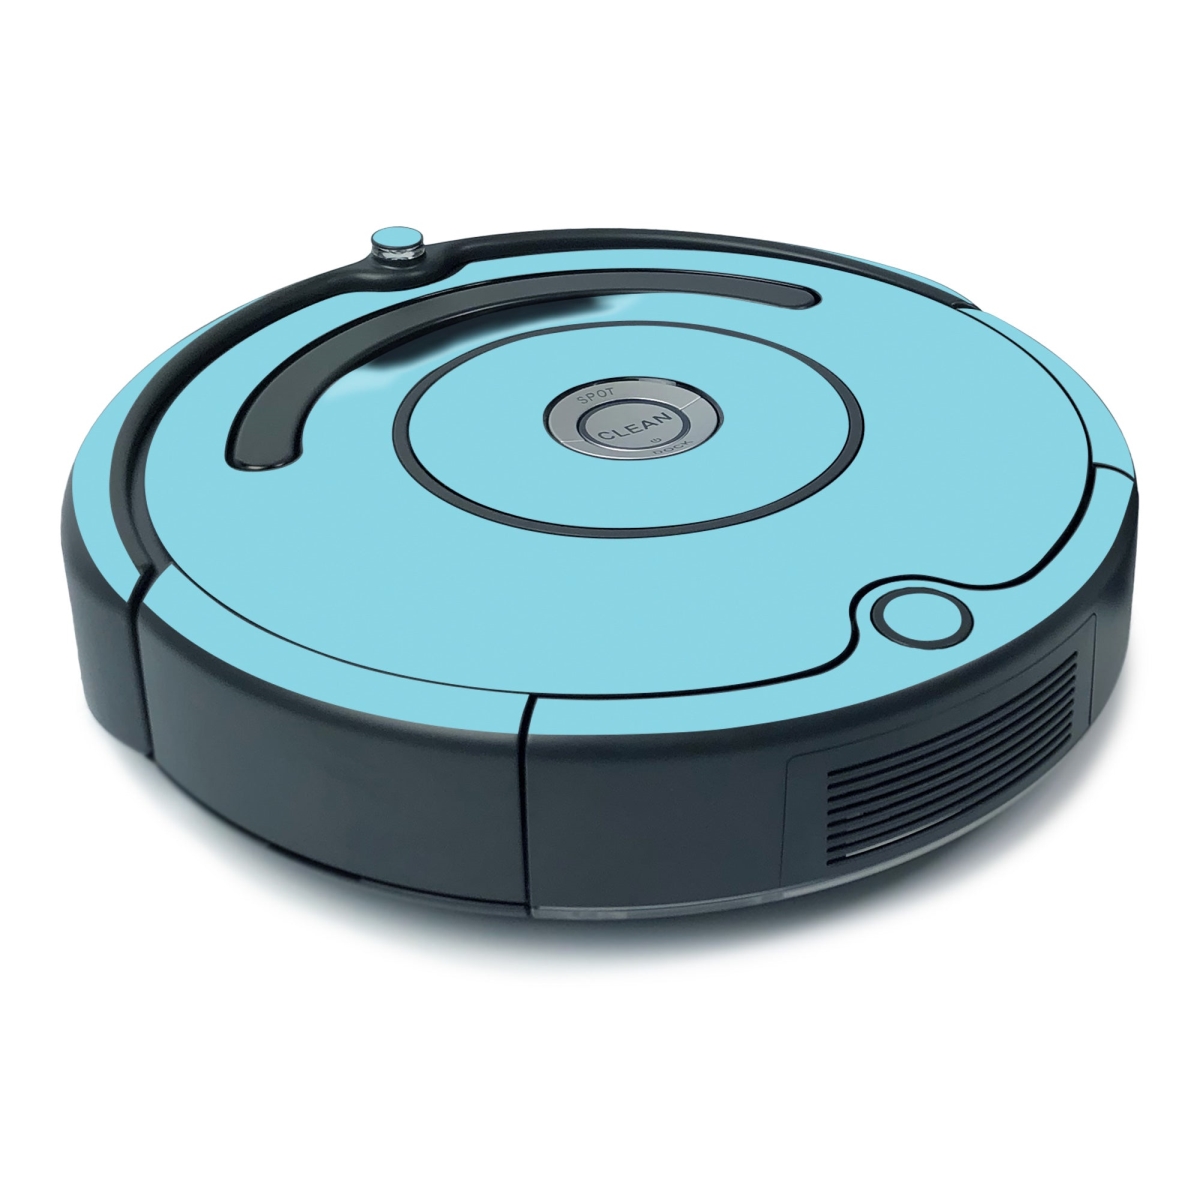 Picture of MightySkins IRRO675MIN-Solid Baby Blue Skin for iRobot Roomba 675 Minimal Coverage - Solid Baby Blue